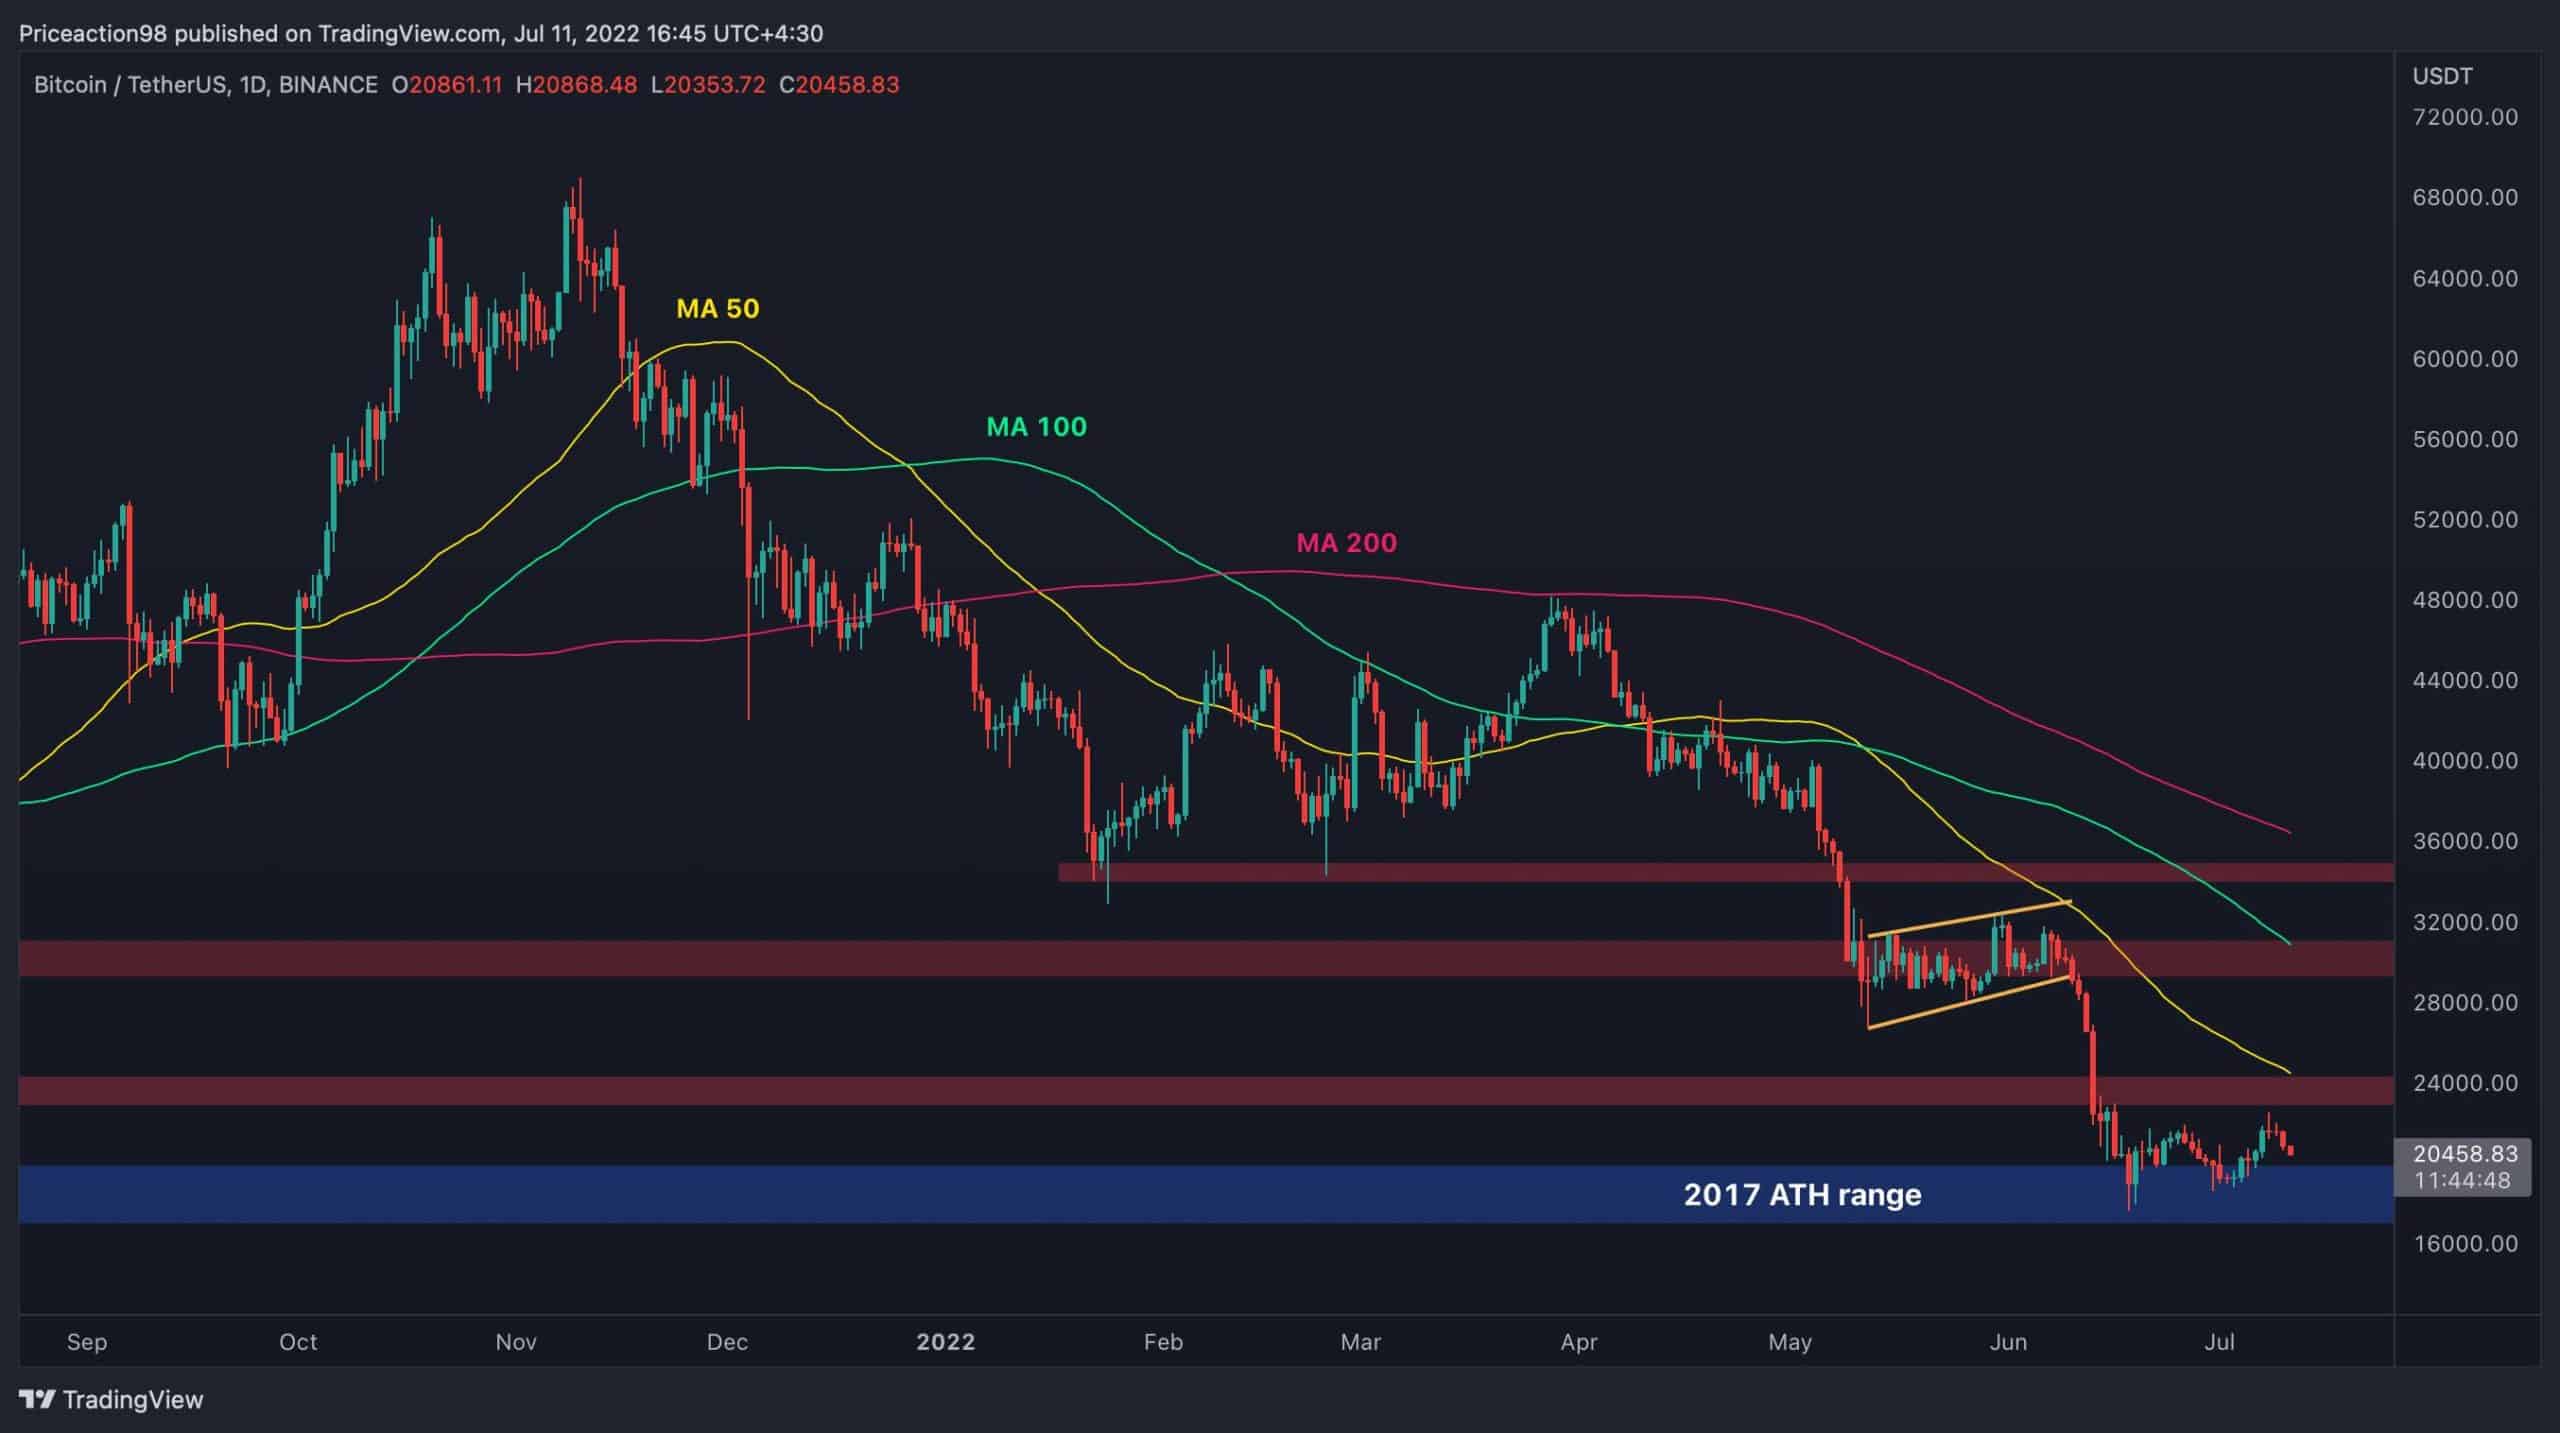 Bearish Signs for BTC Reapper, Will K Hold or More Pain Ahead? (Bitcoin Price Analysis)